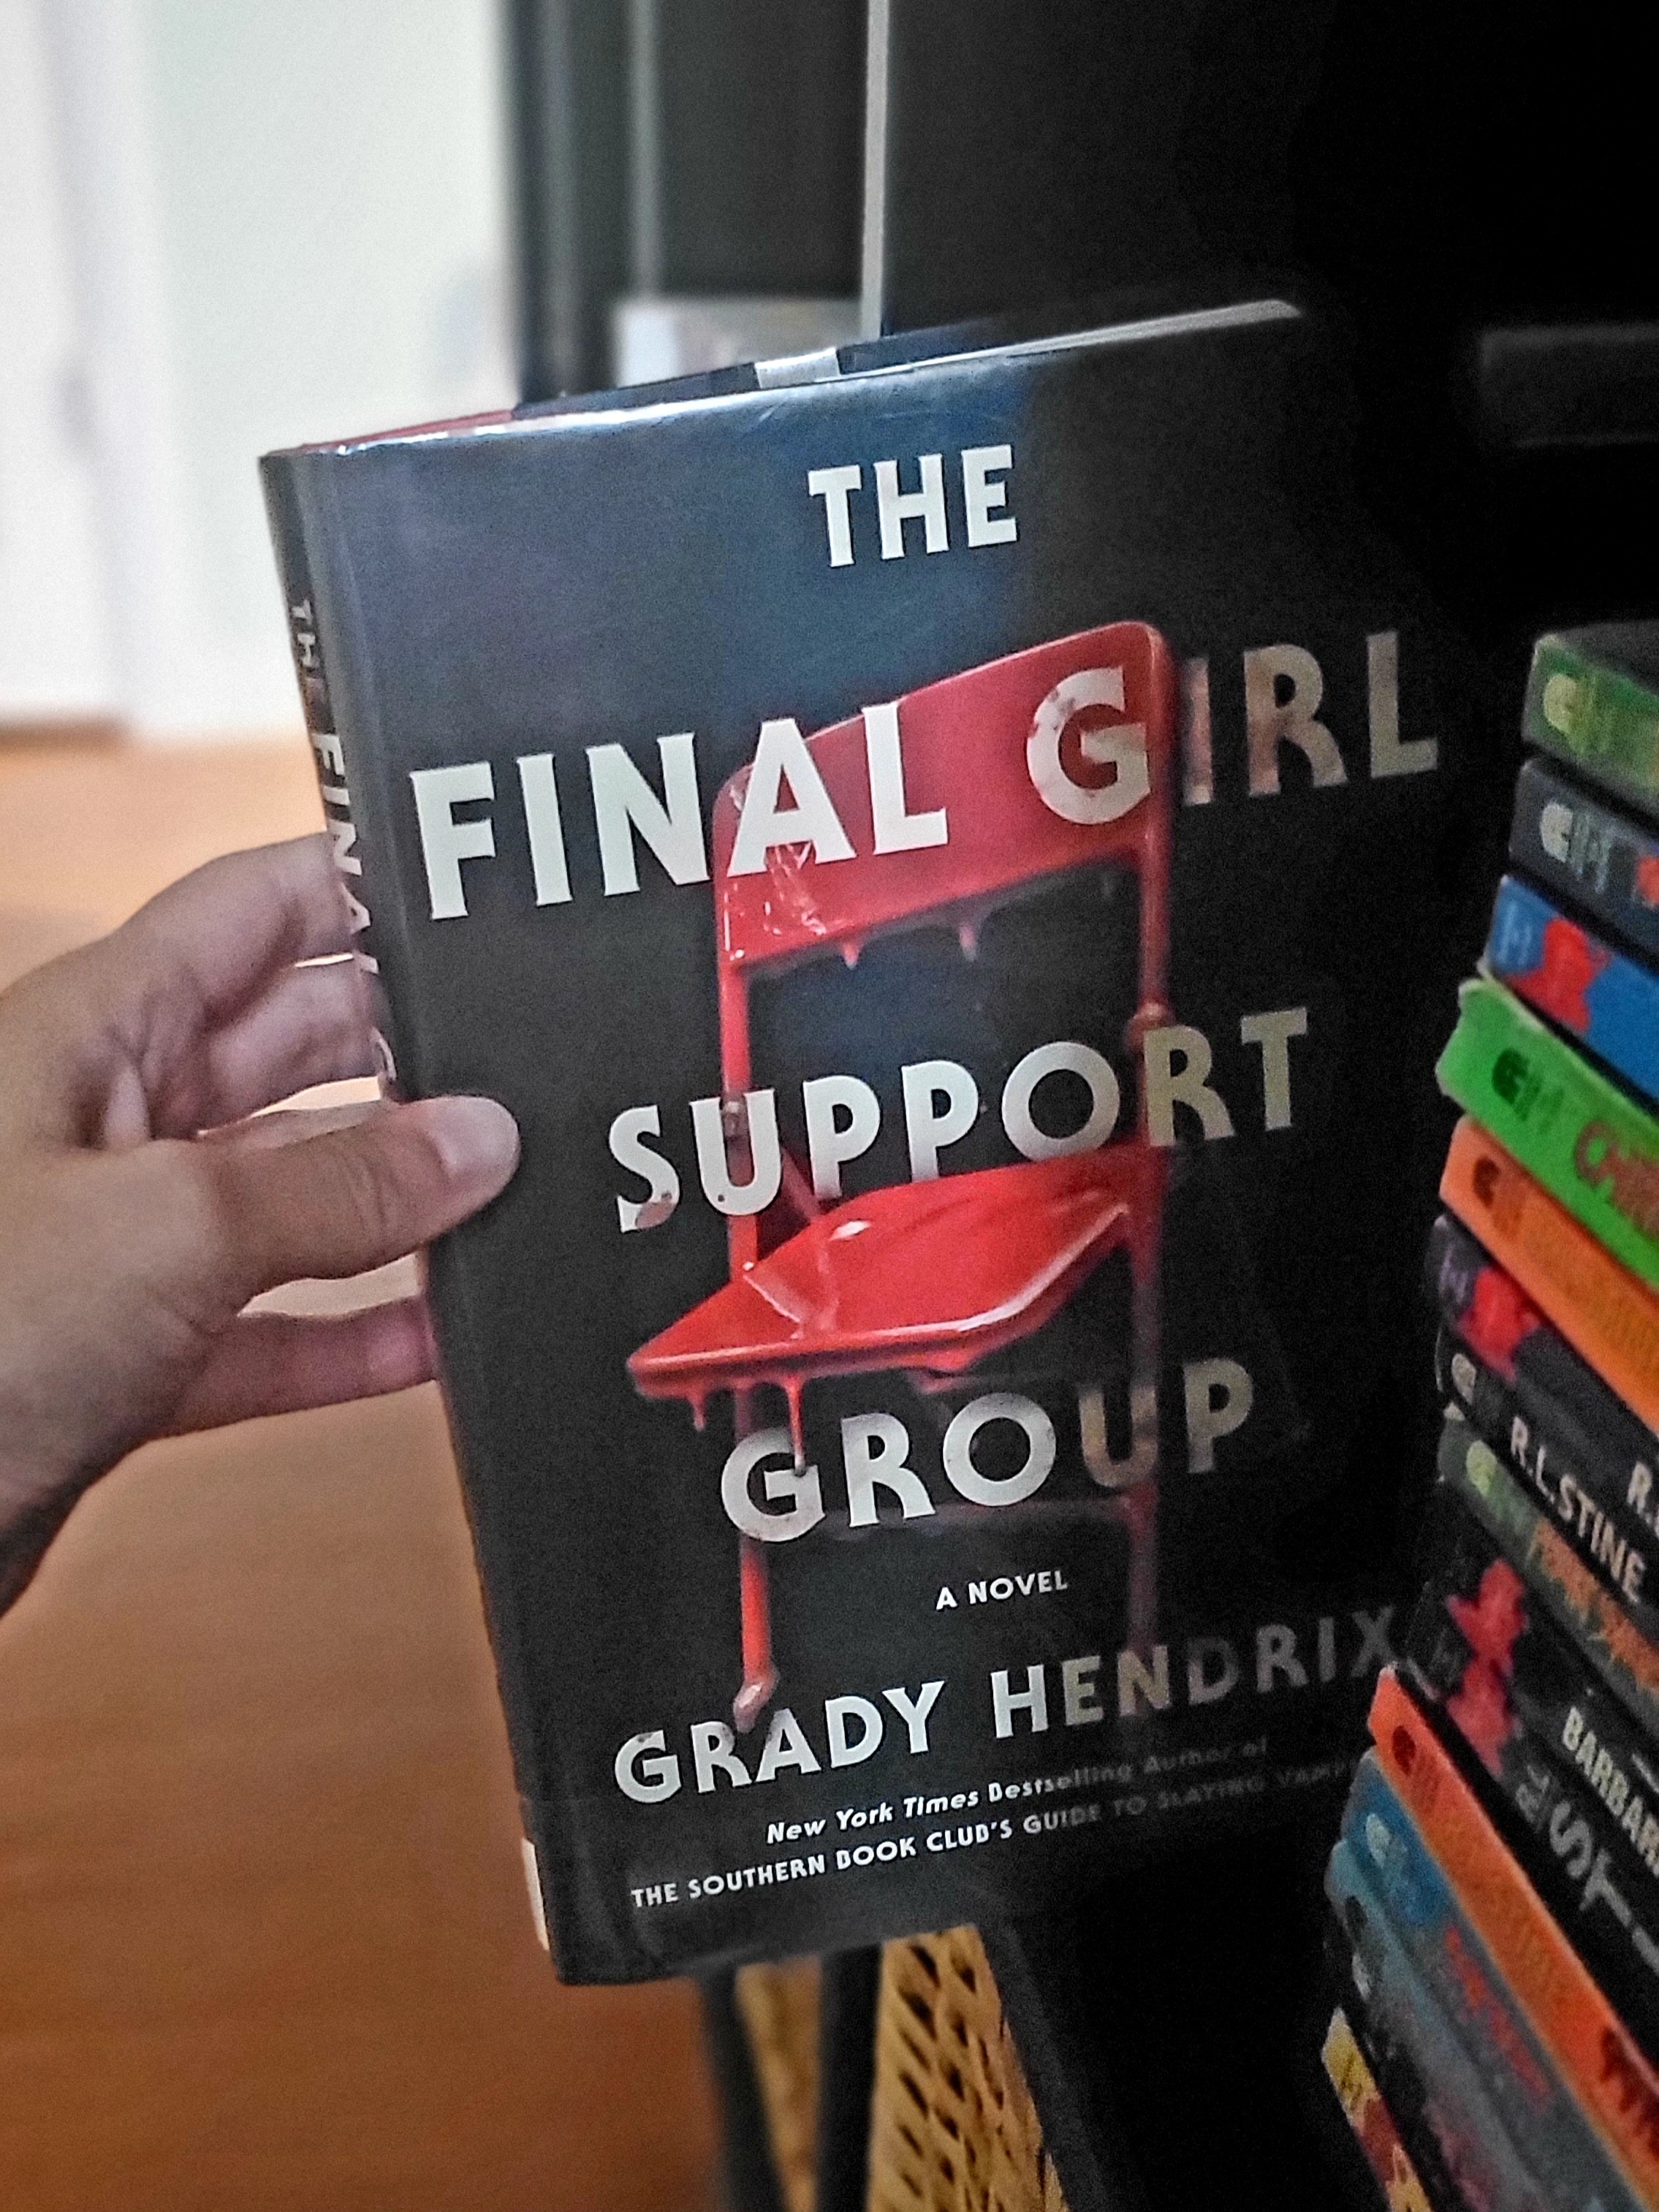 The Final Girl Support Group by Grady Hendrix being pulled off a bookshelf.